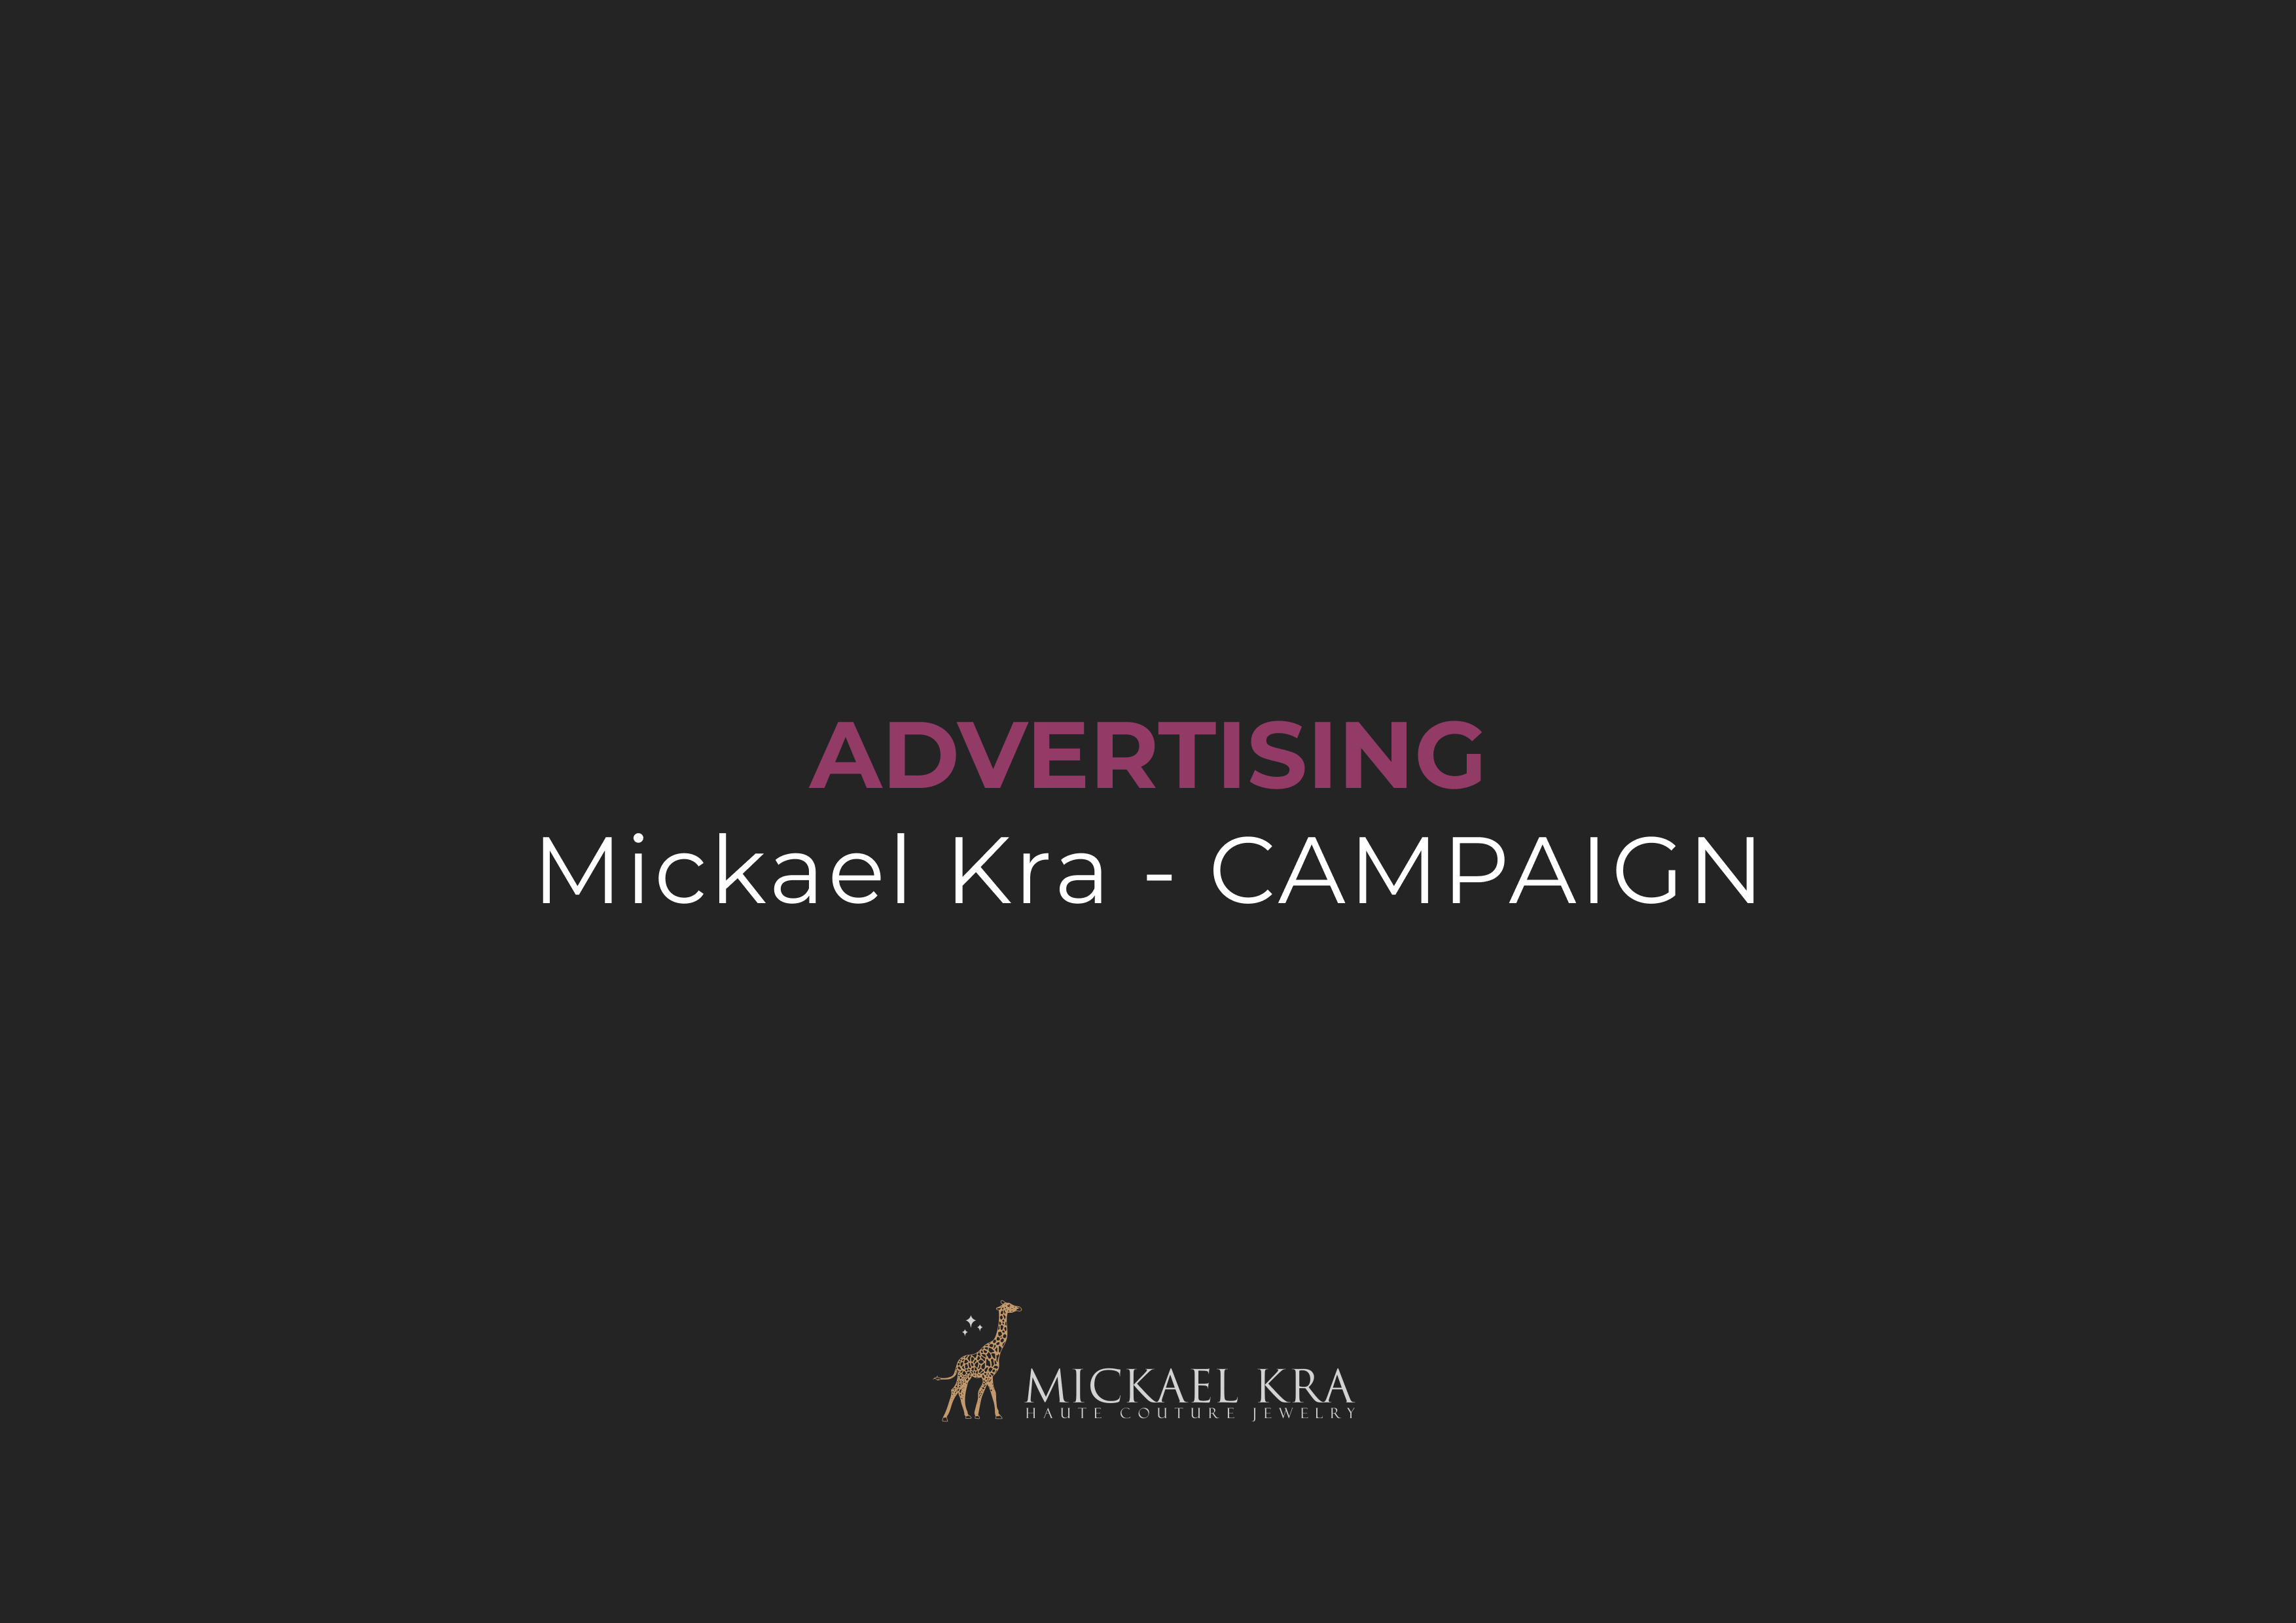 MK - Advertising campaign